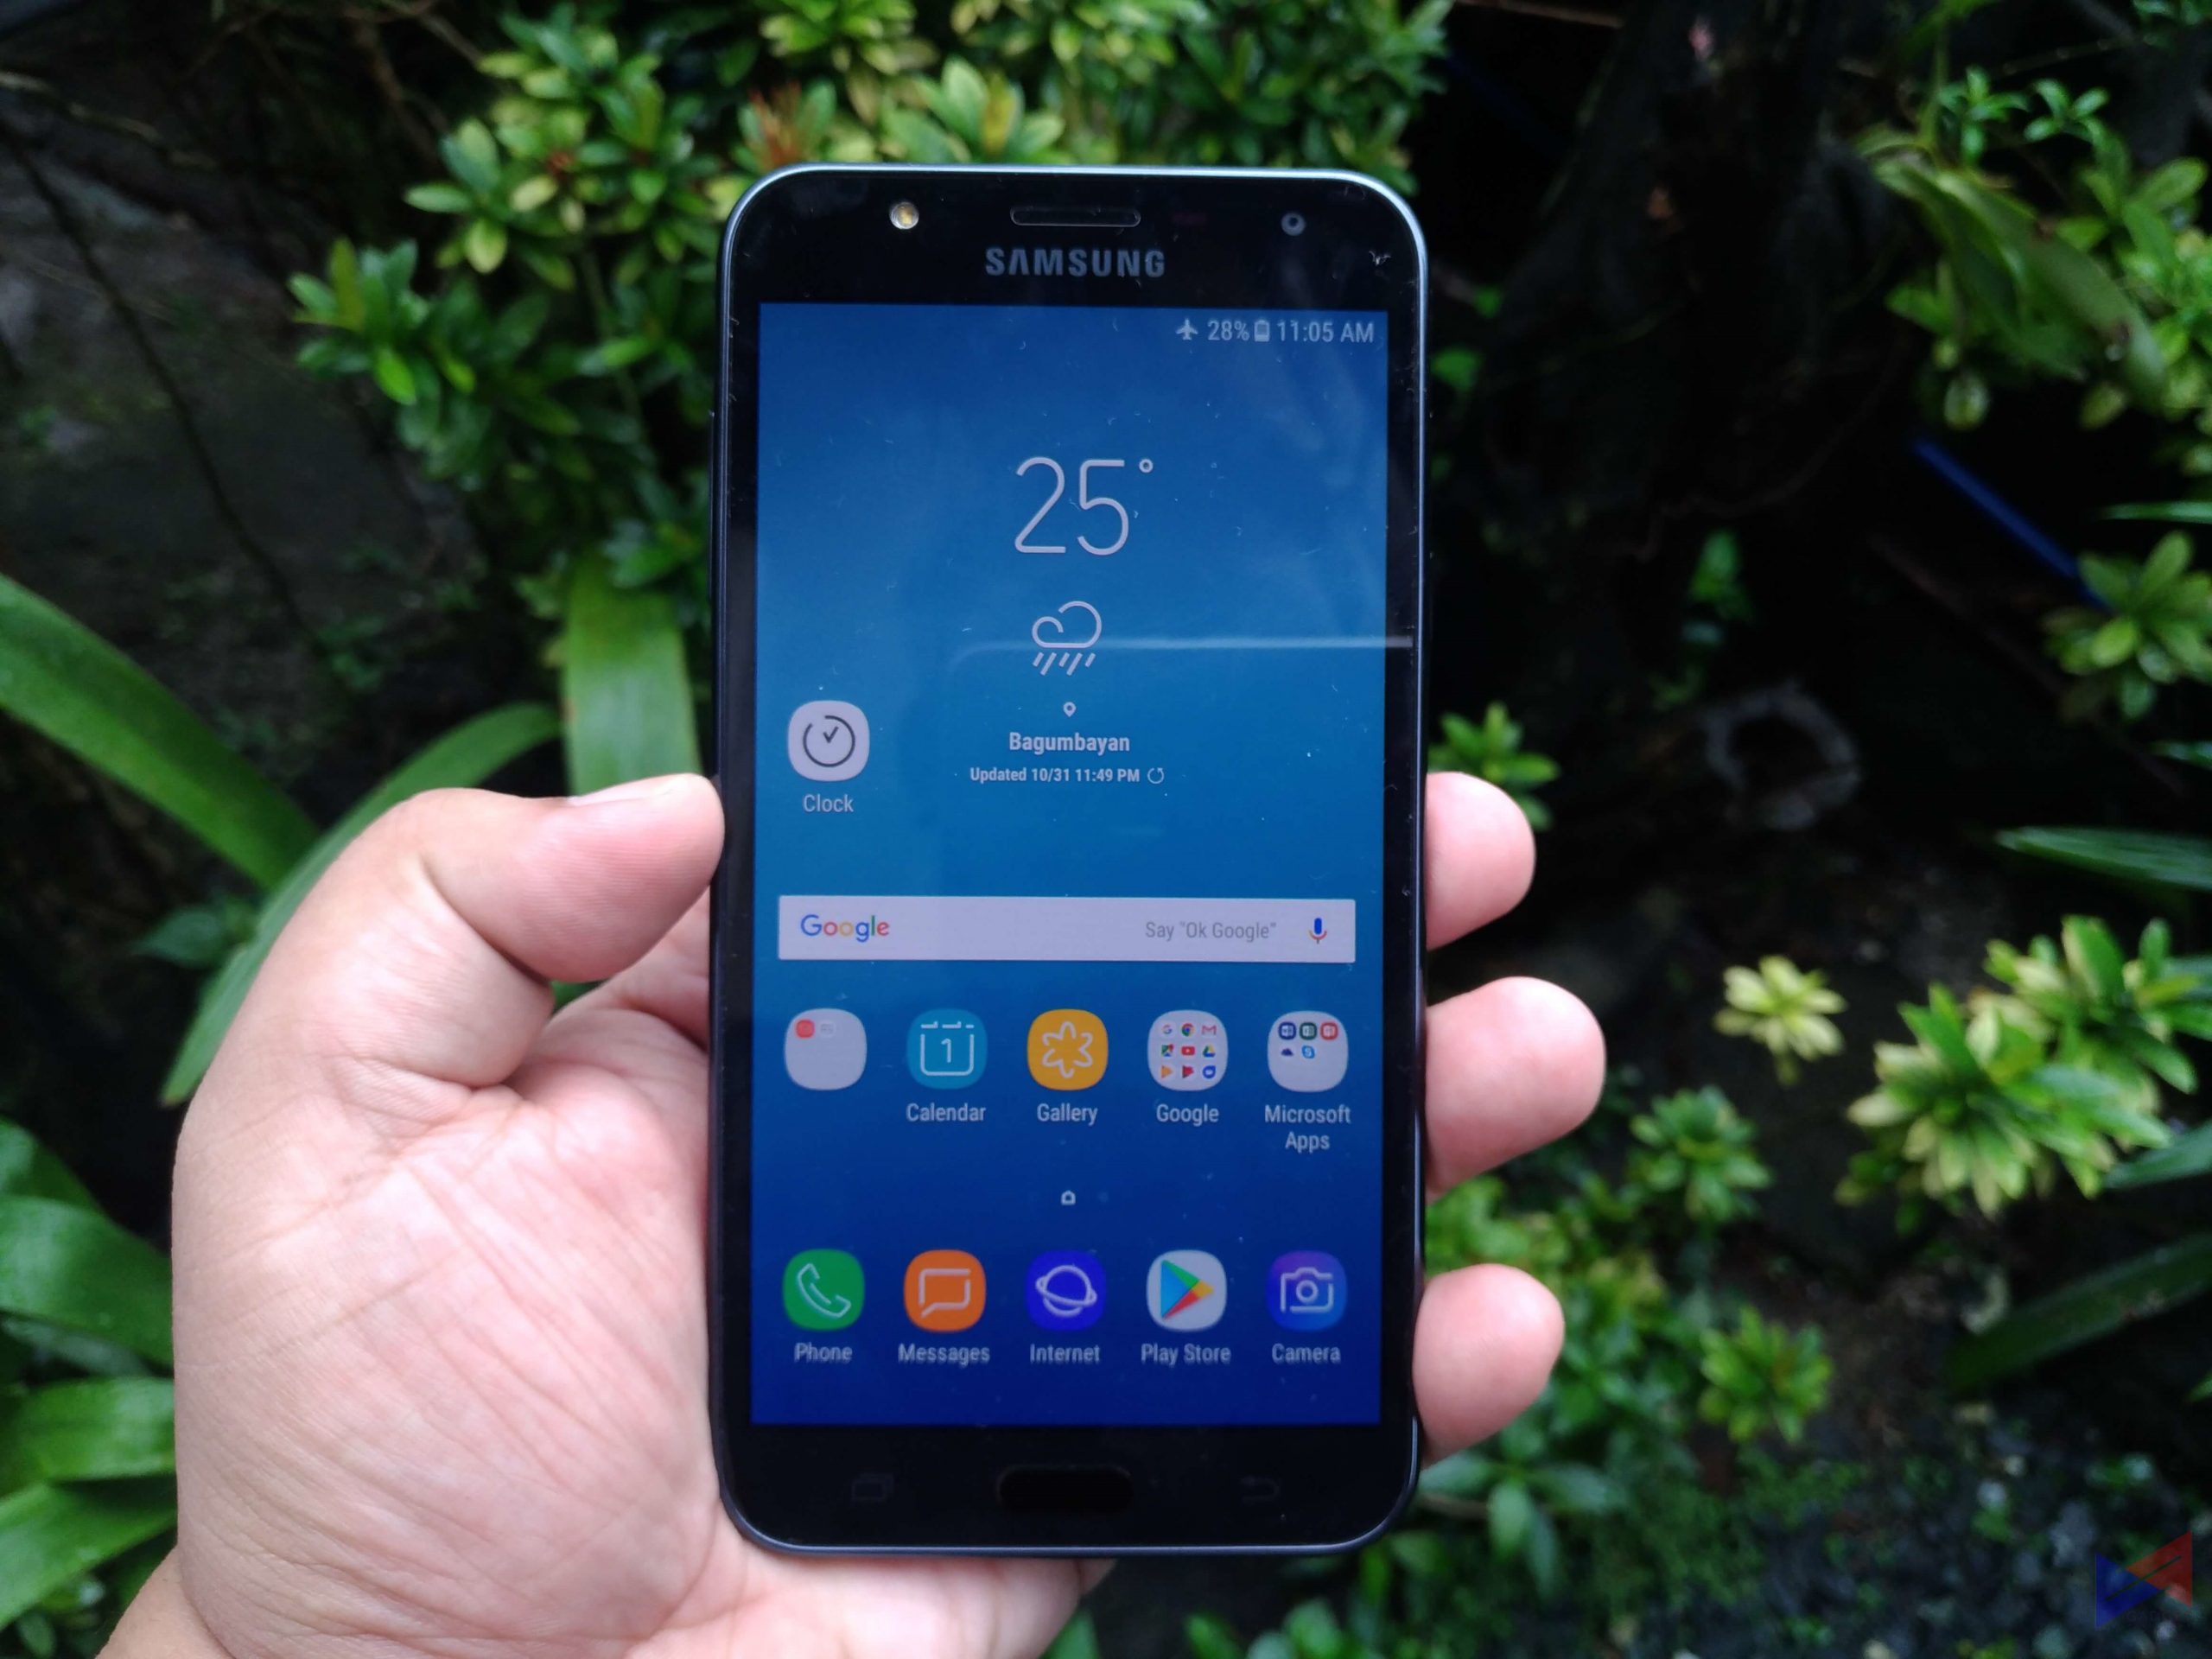 Samsung Galaxy J7 Core Review: Just Right